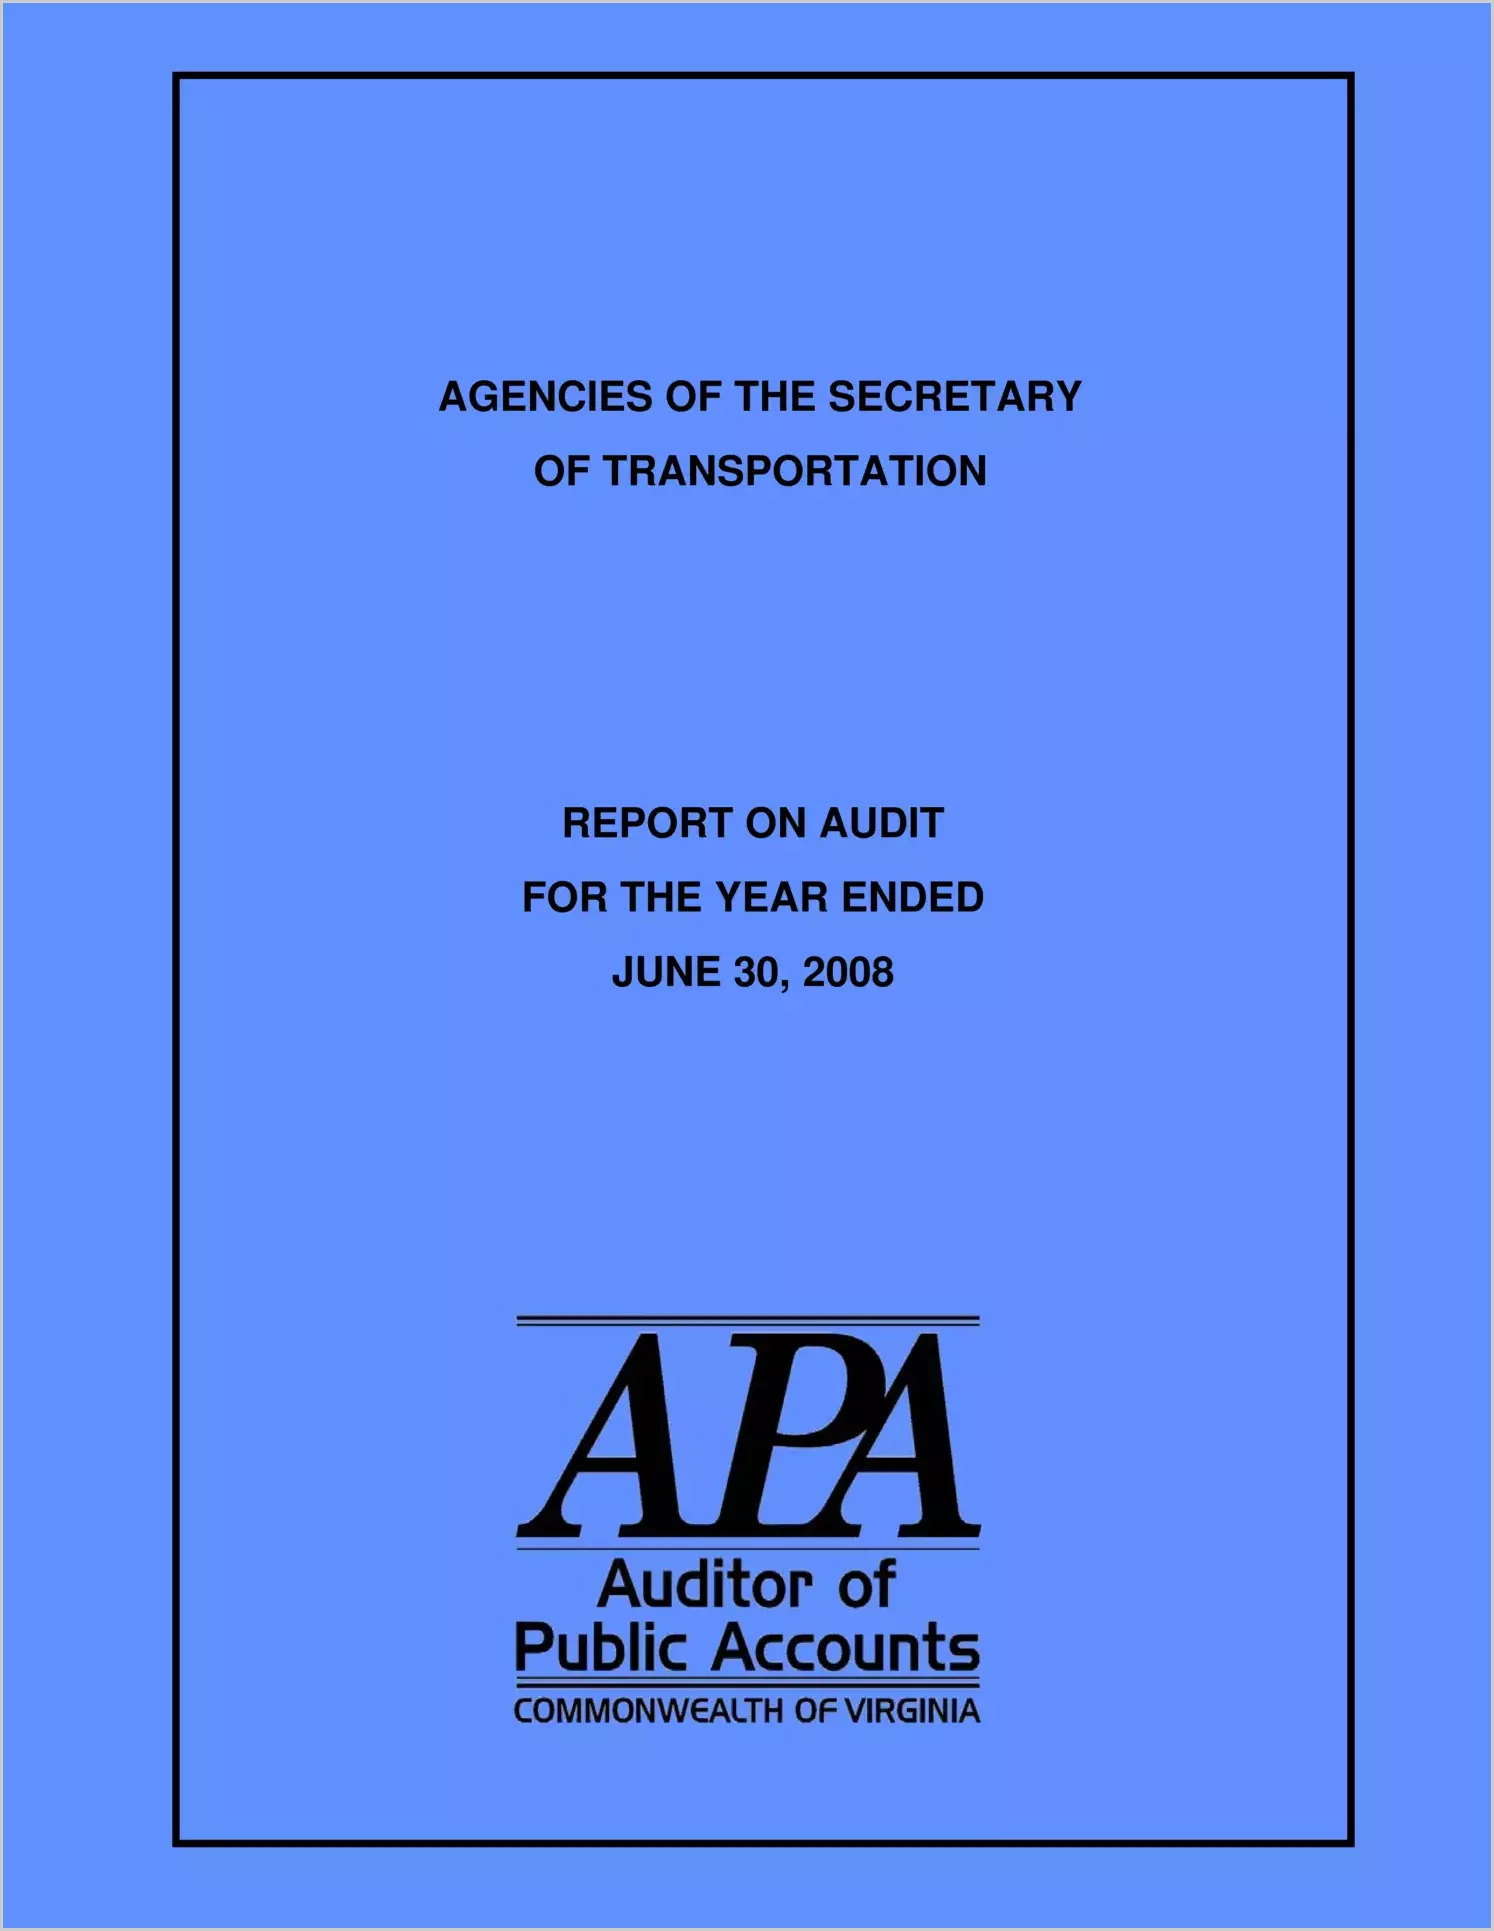 Agencies of the Secretary of Transportation for the year ended June 30, 2008